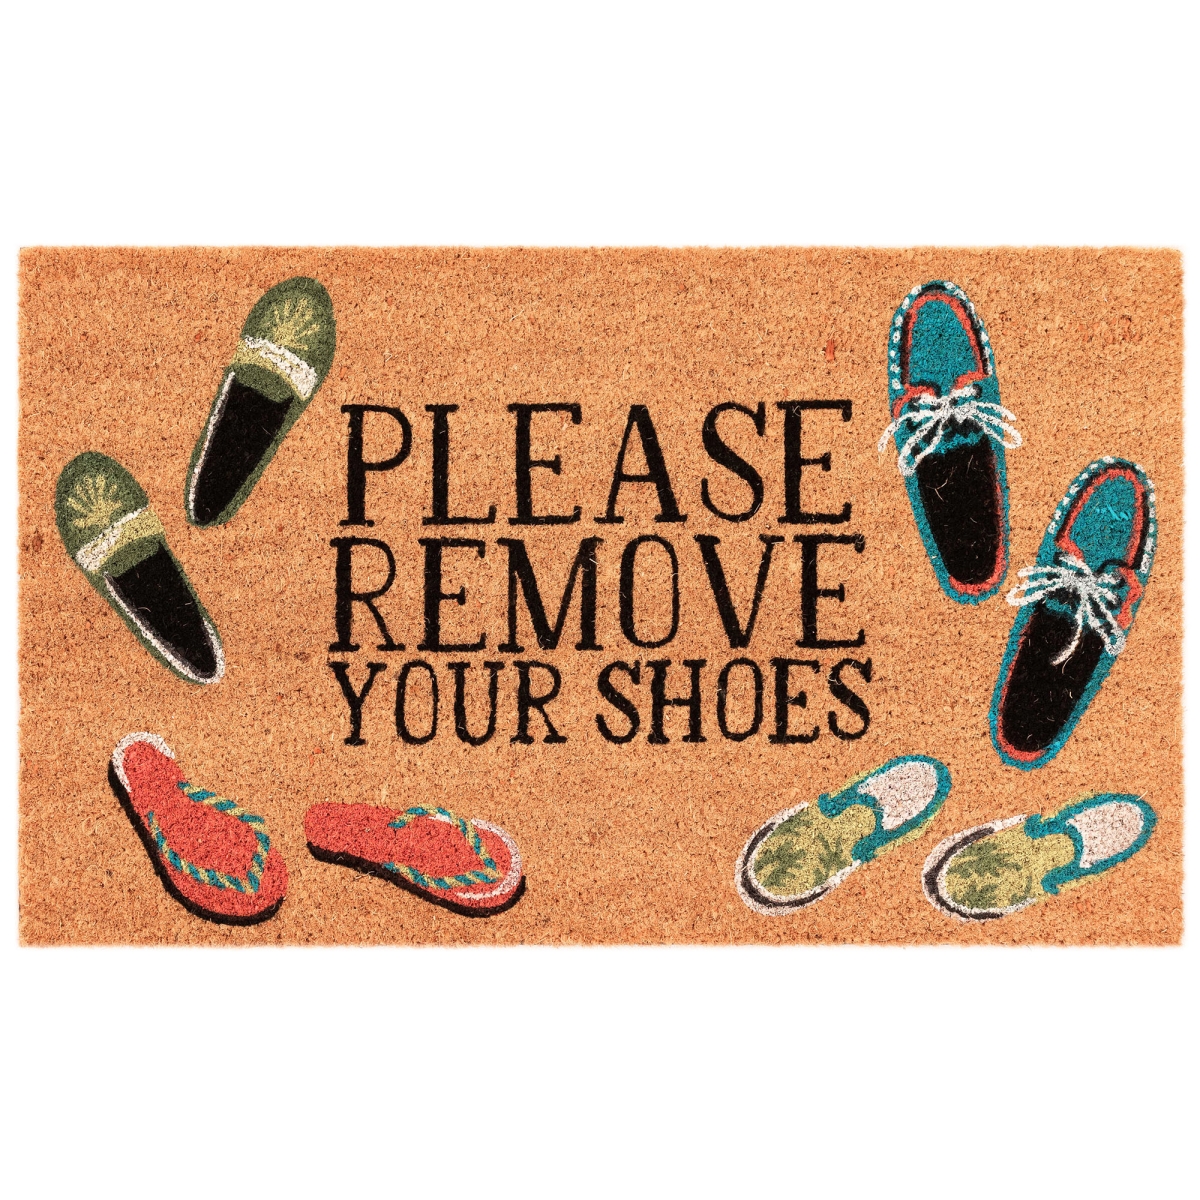 Ntr23222412 Liora Manne Natura Please Remove Your Shoes Outdoor Mat, Natural - 24 X 36 In.